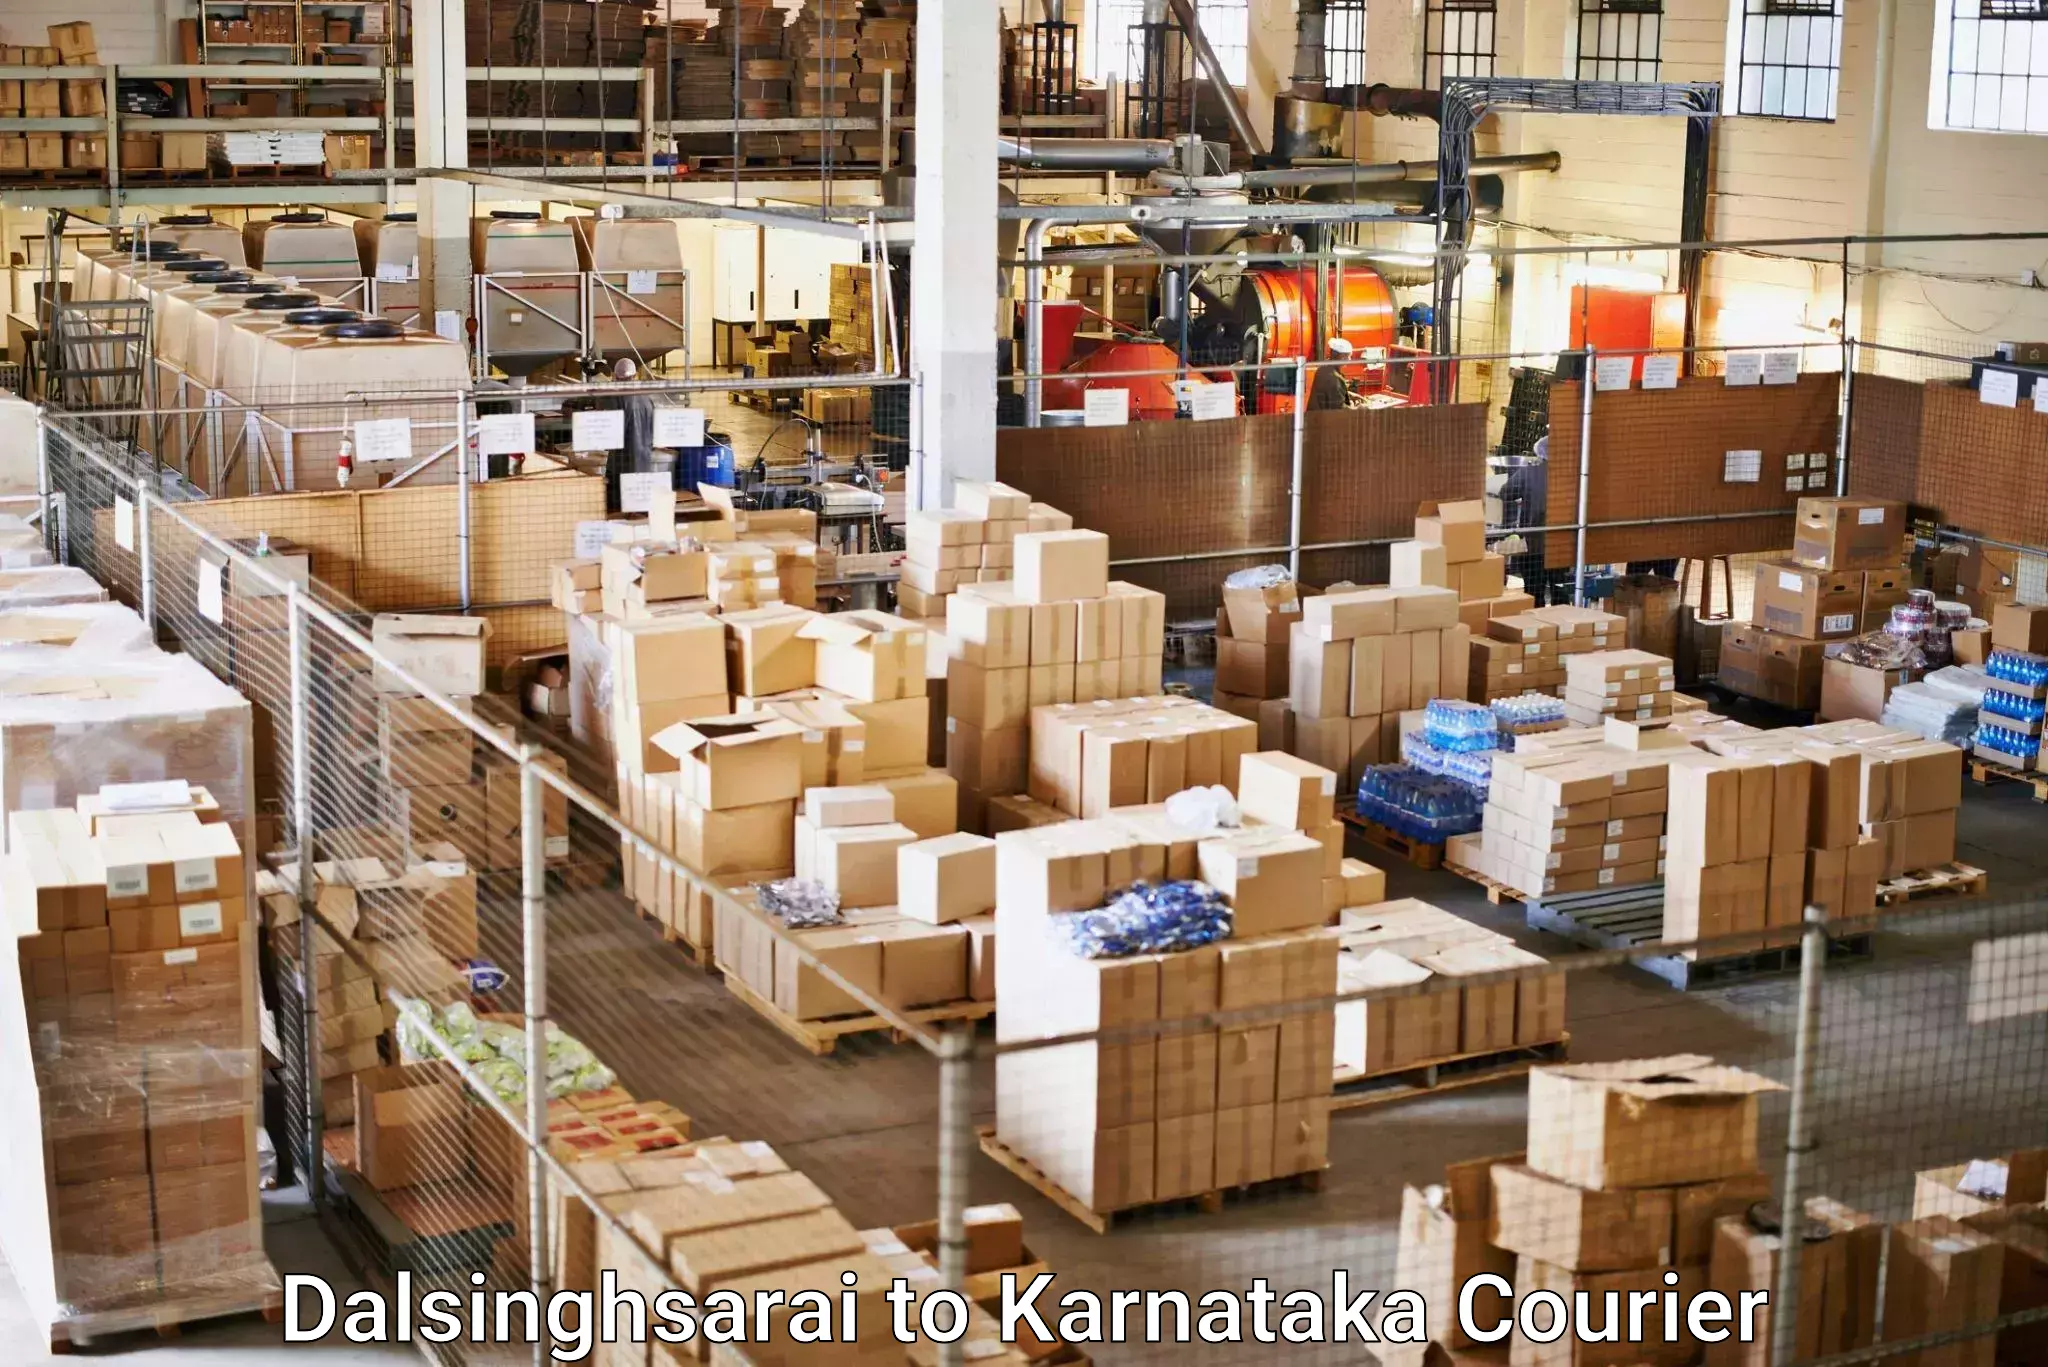 Reliable parcel services in Dalsinghsarai to Athani